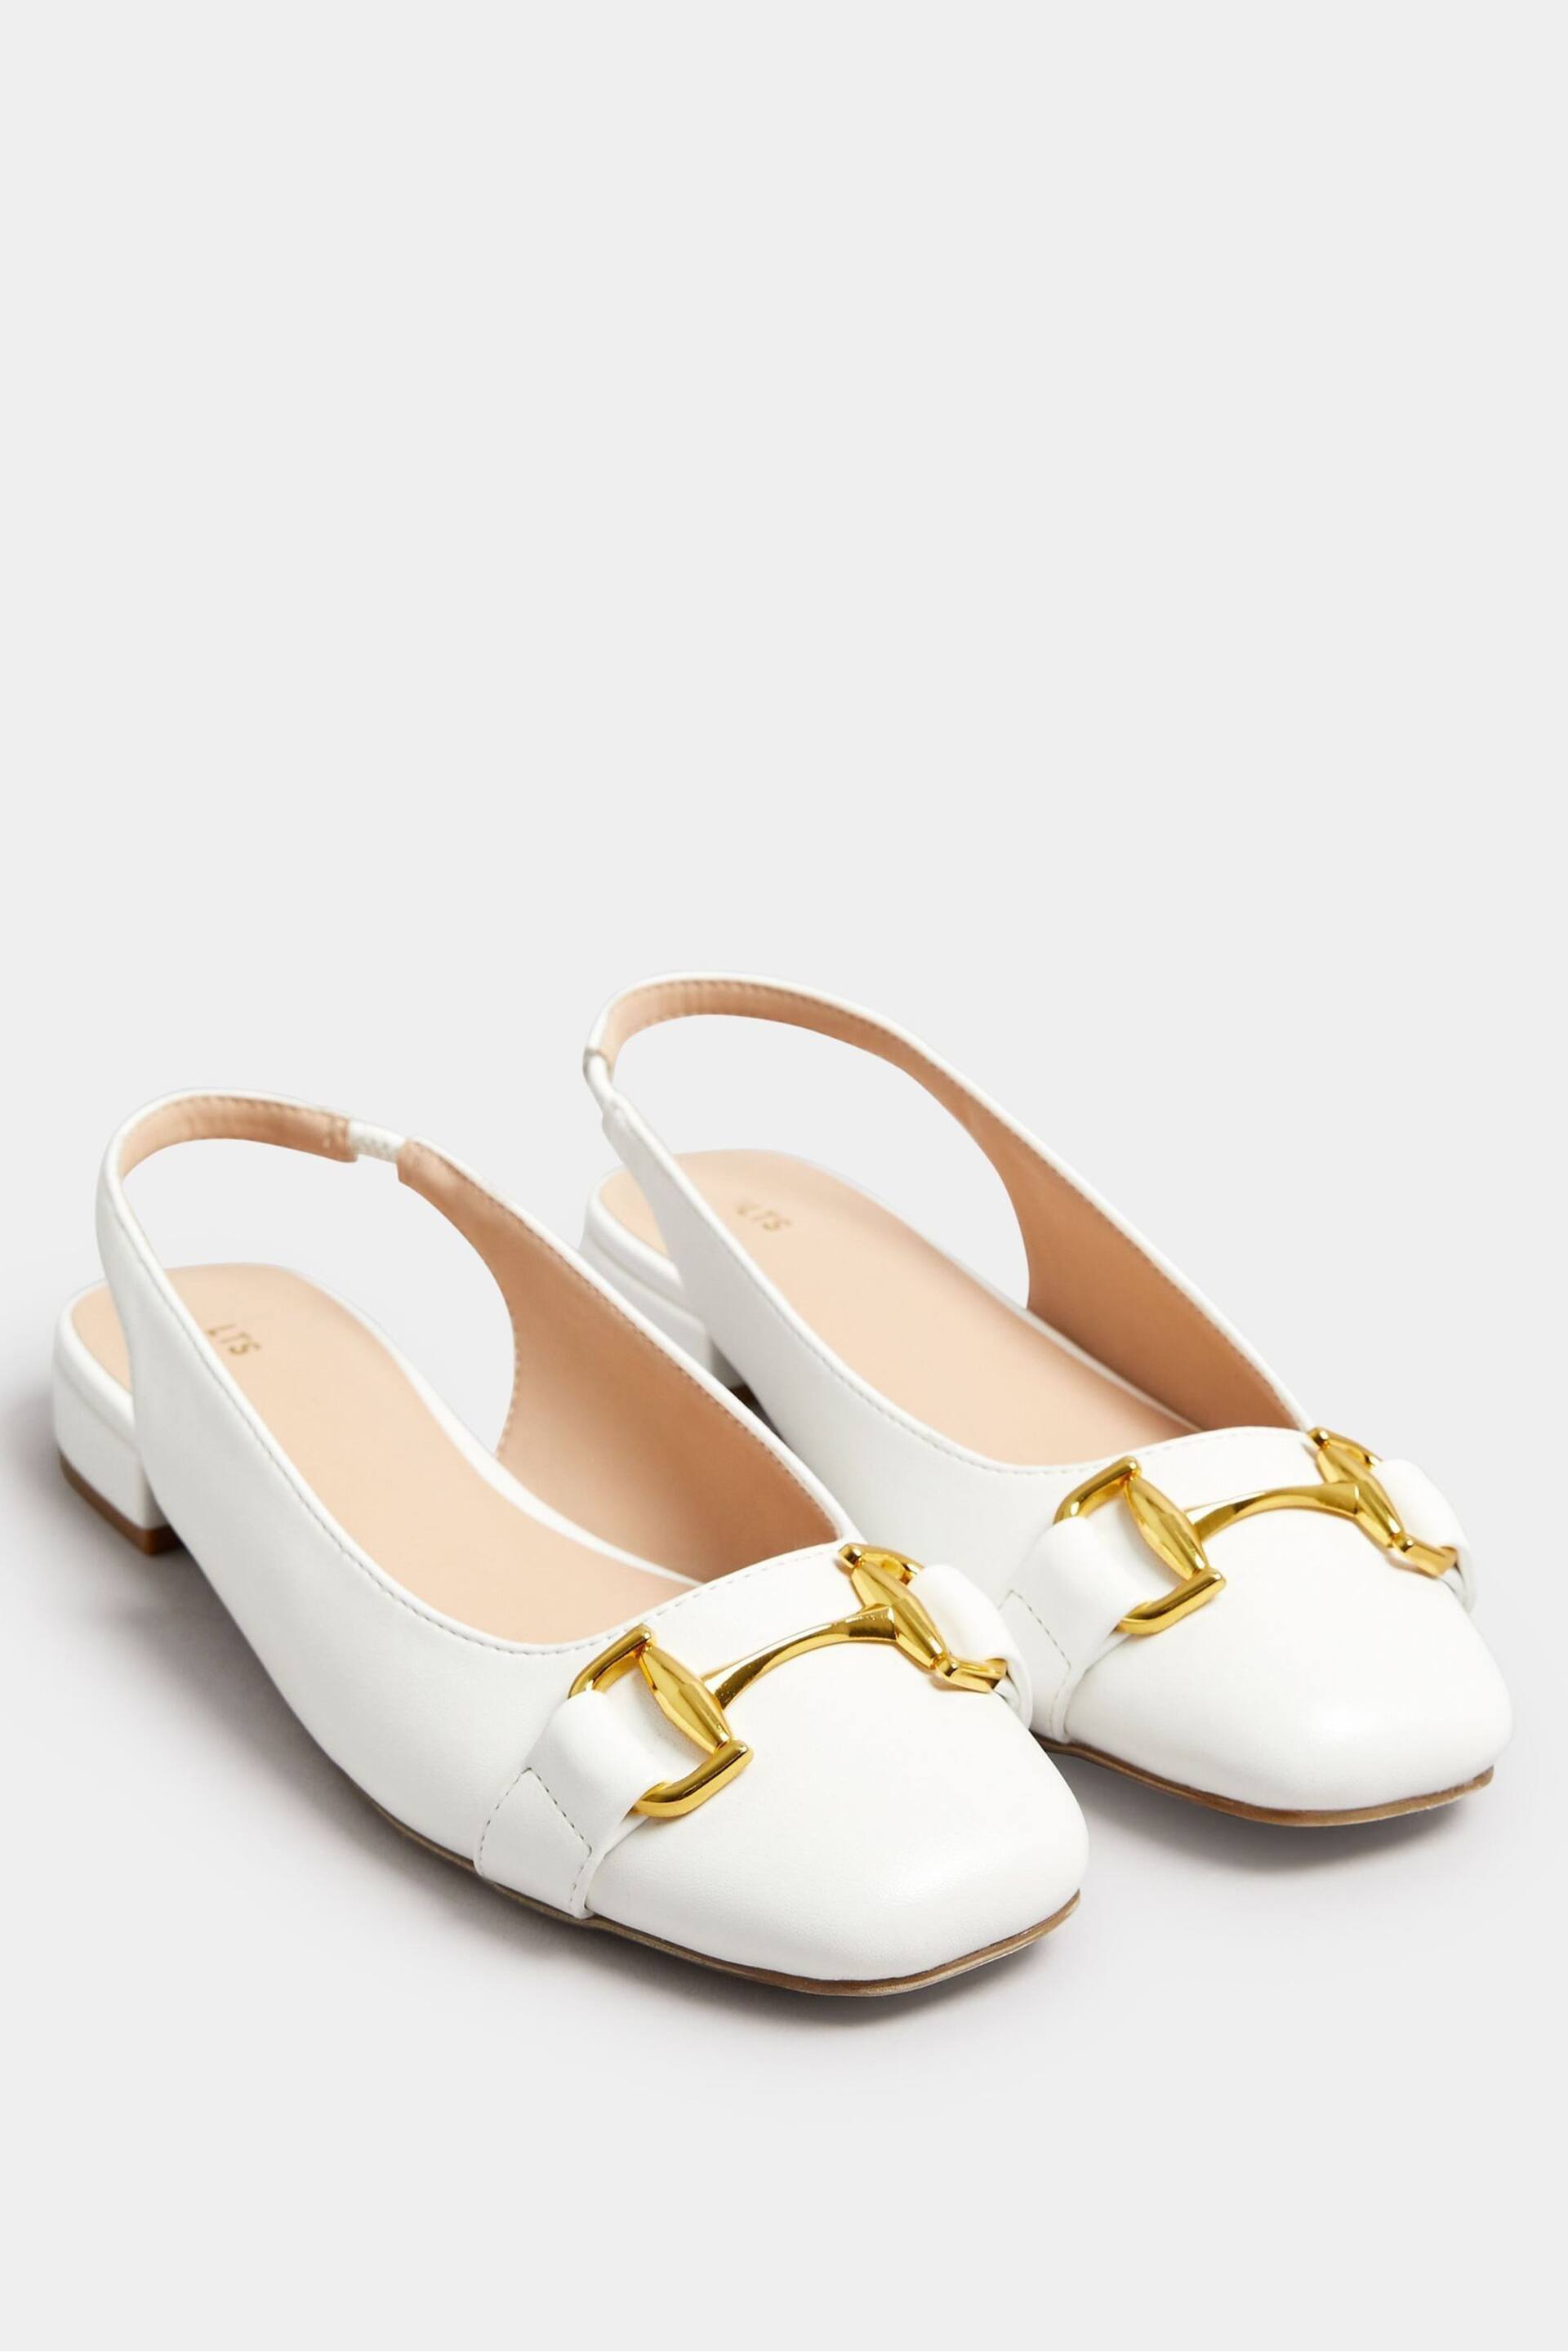 Long Tall Sally White Slingback Ballet Shoes With Trim - Image 3 of 6